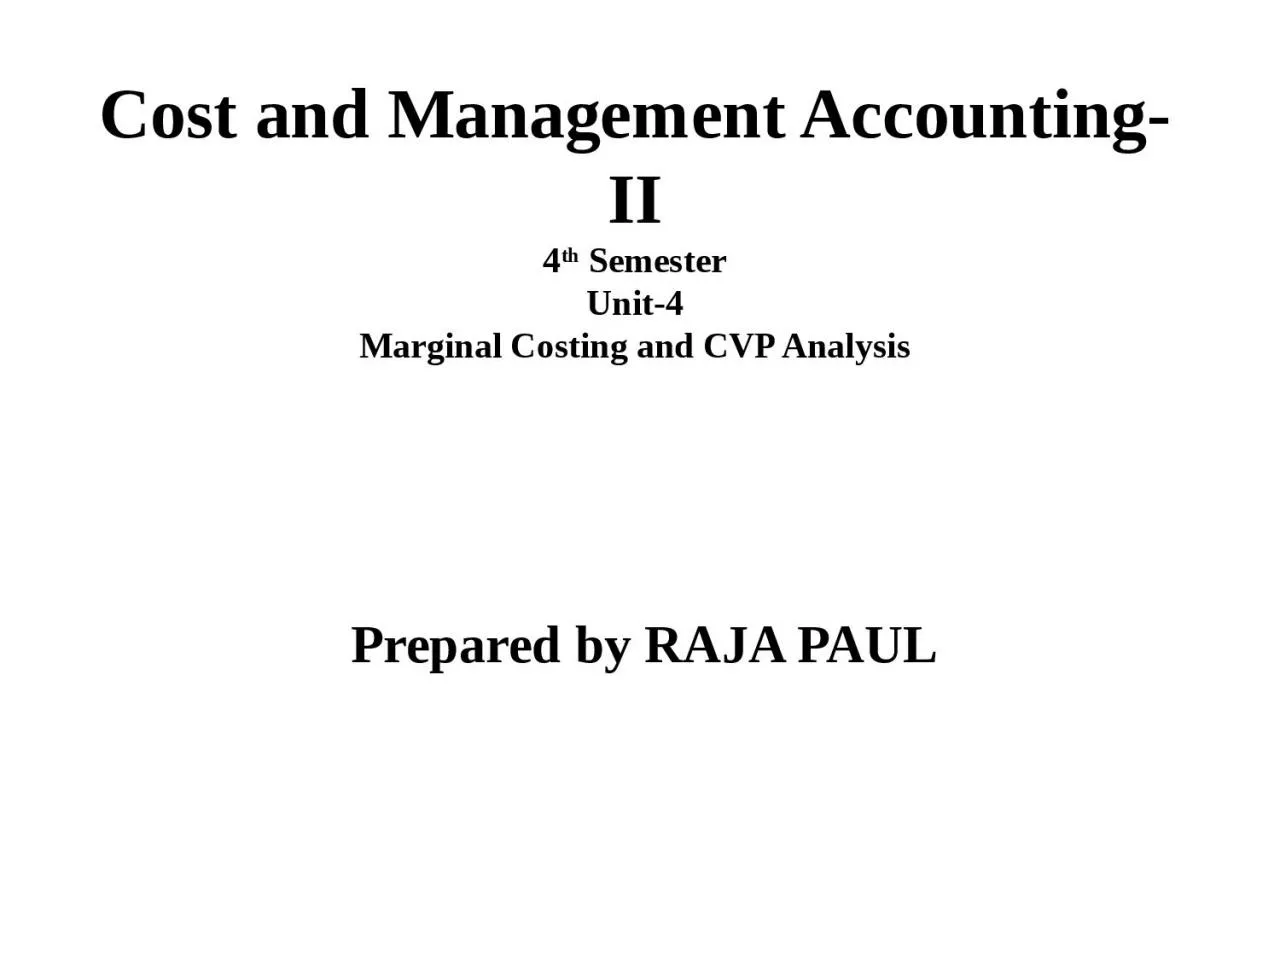 Cost and Management Accounting-II